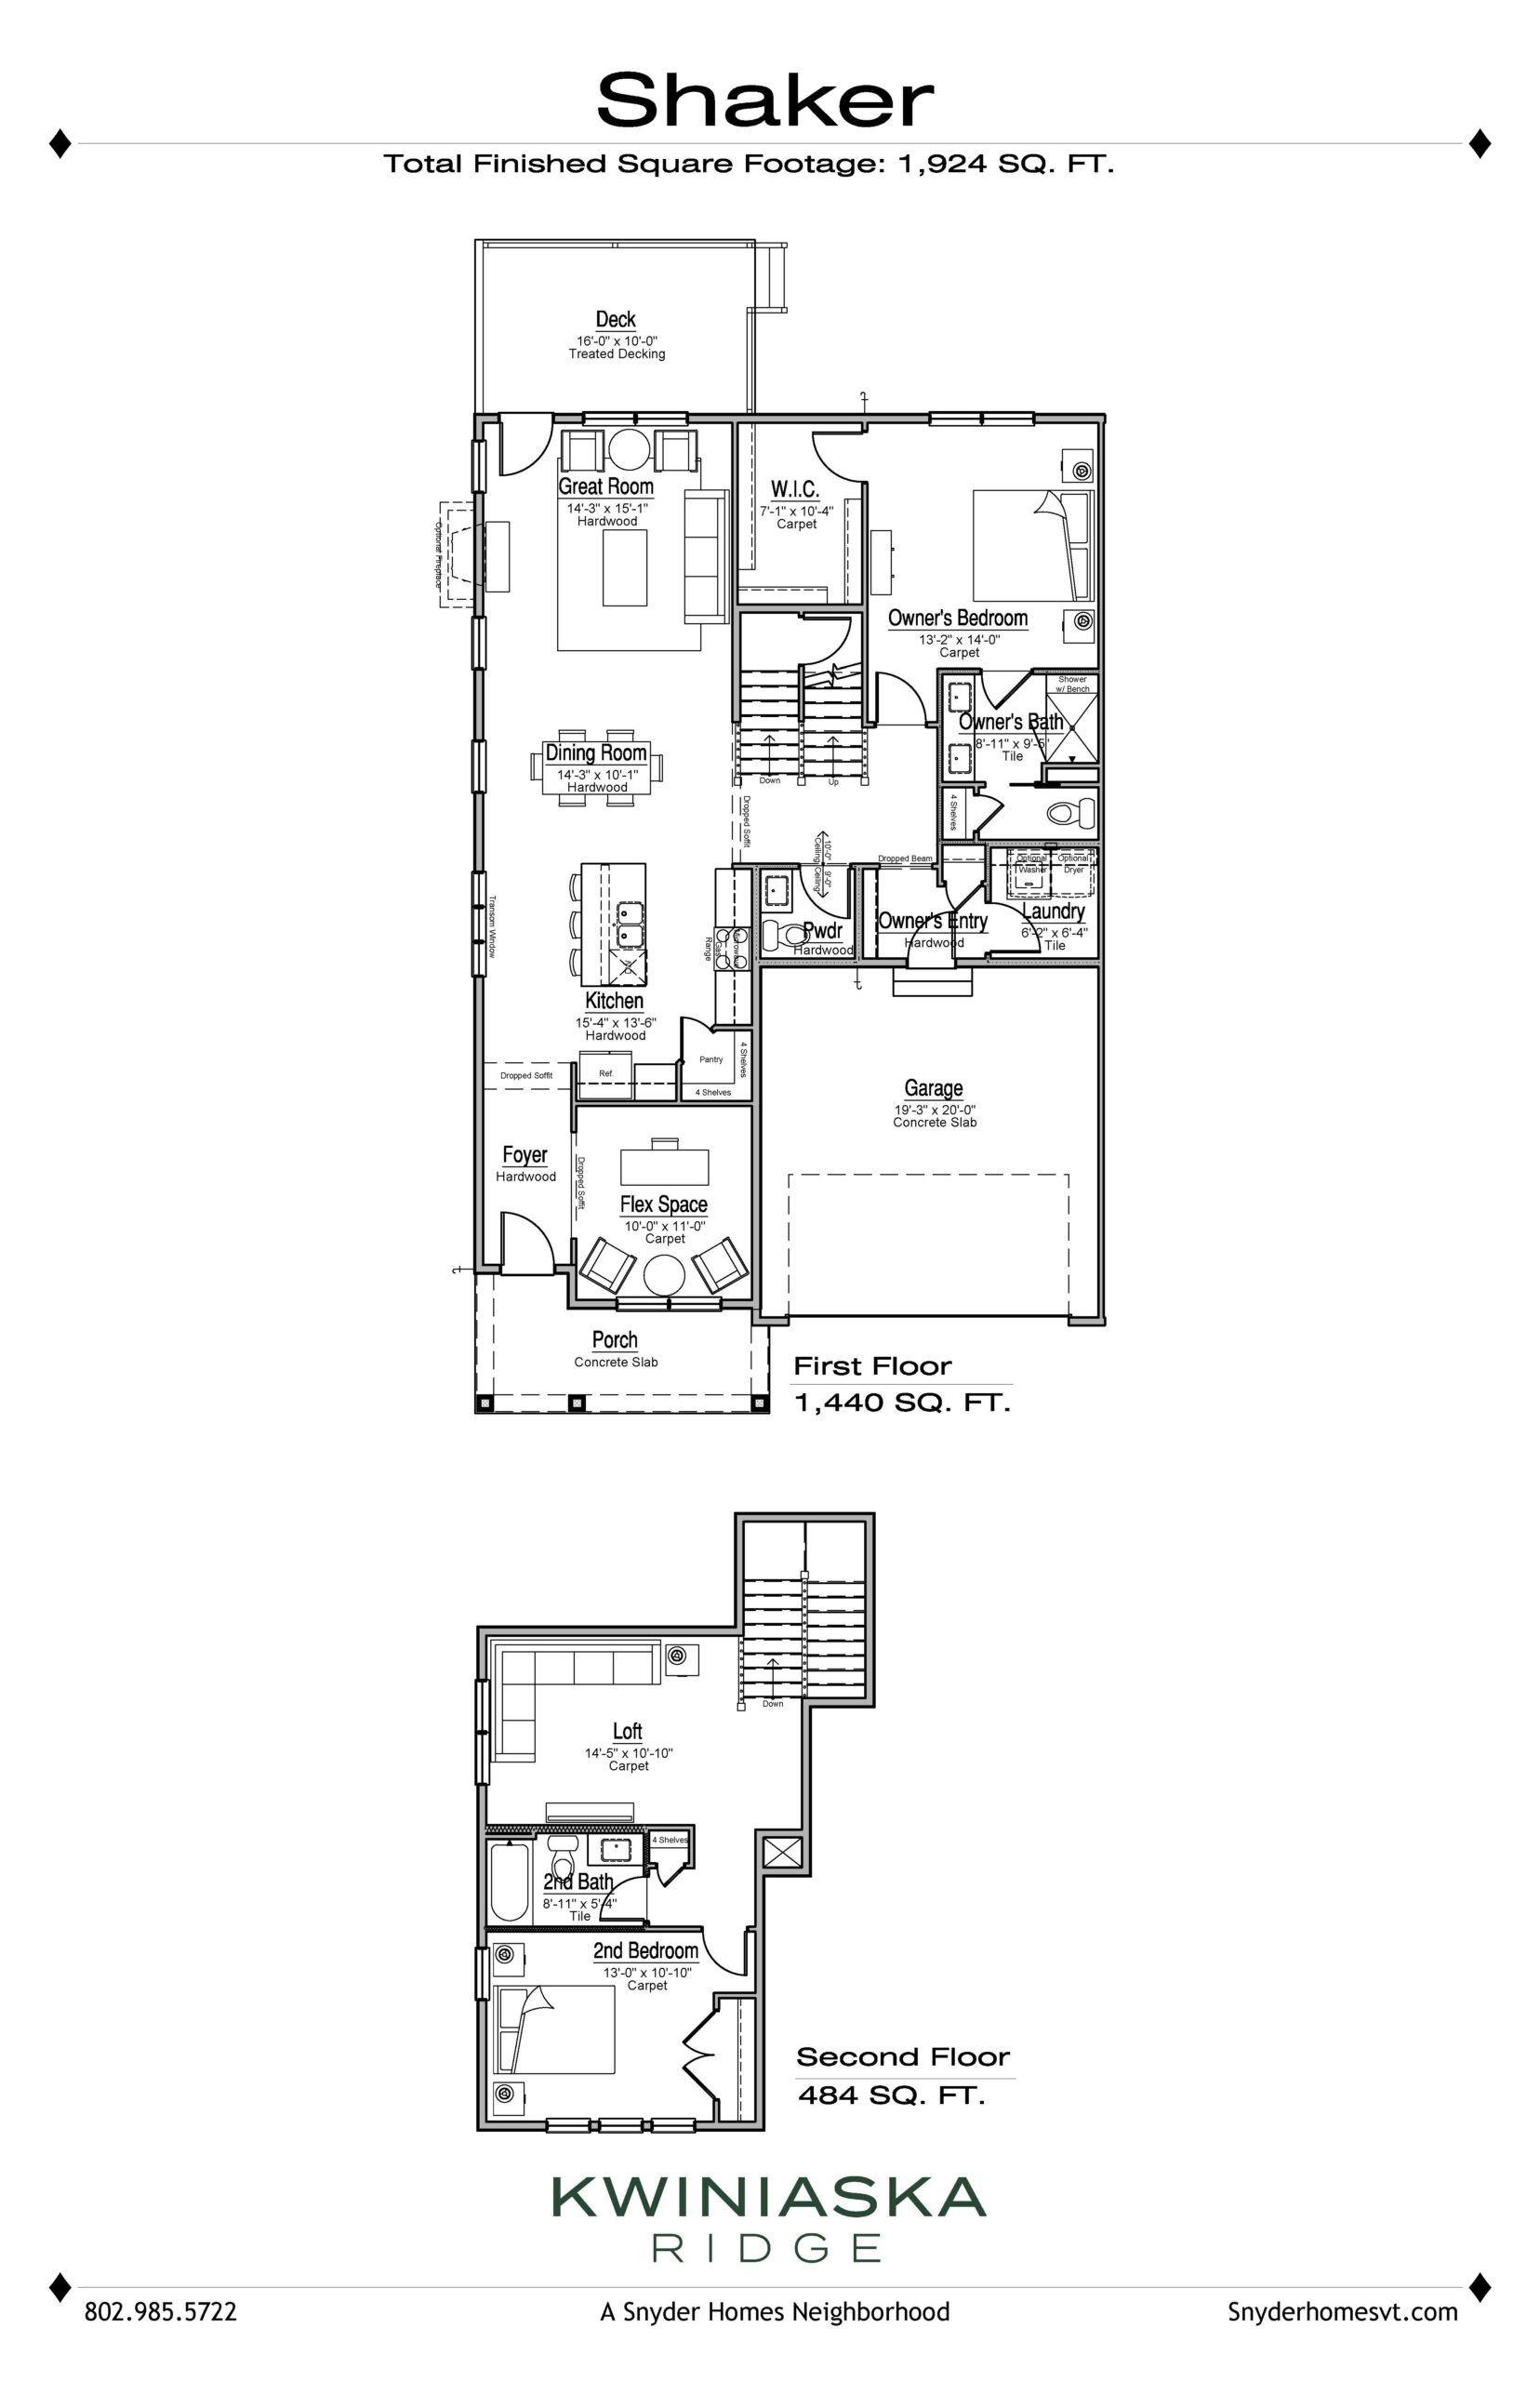 Architectural floor plan of the "shaker" model house showing three levels: basement, first floor, and second floor with annotations for room dimensions and layout.